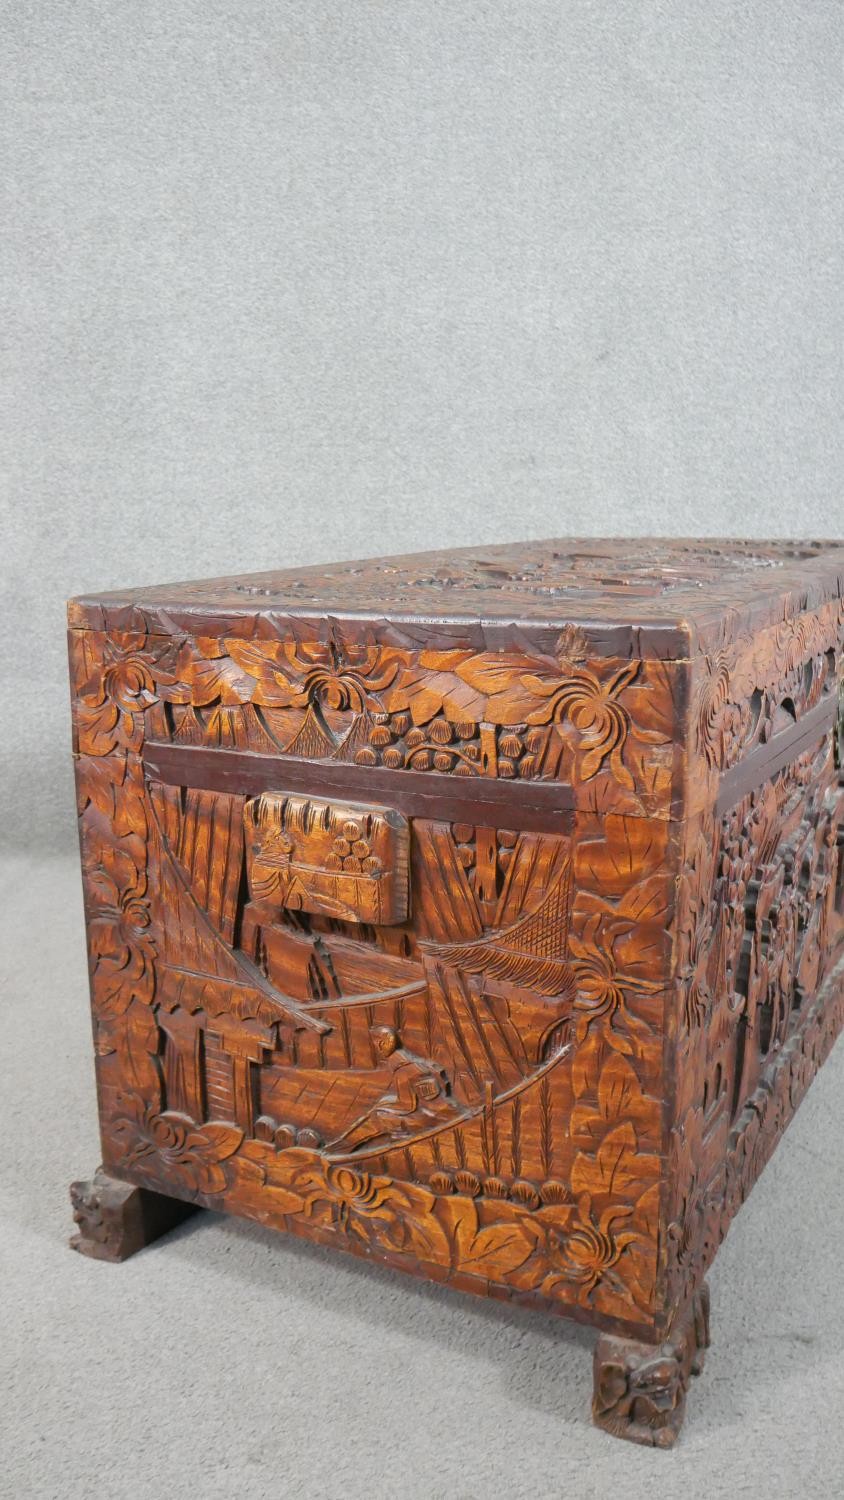 A 20th century Chinese camphorwood coffer, of rectangular form, the lid and sides ornately carved - Image 9 of 9